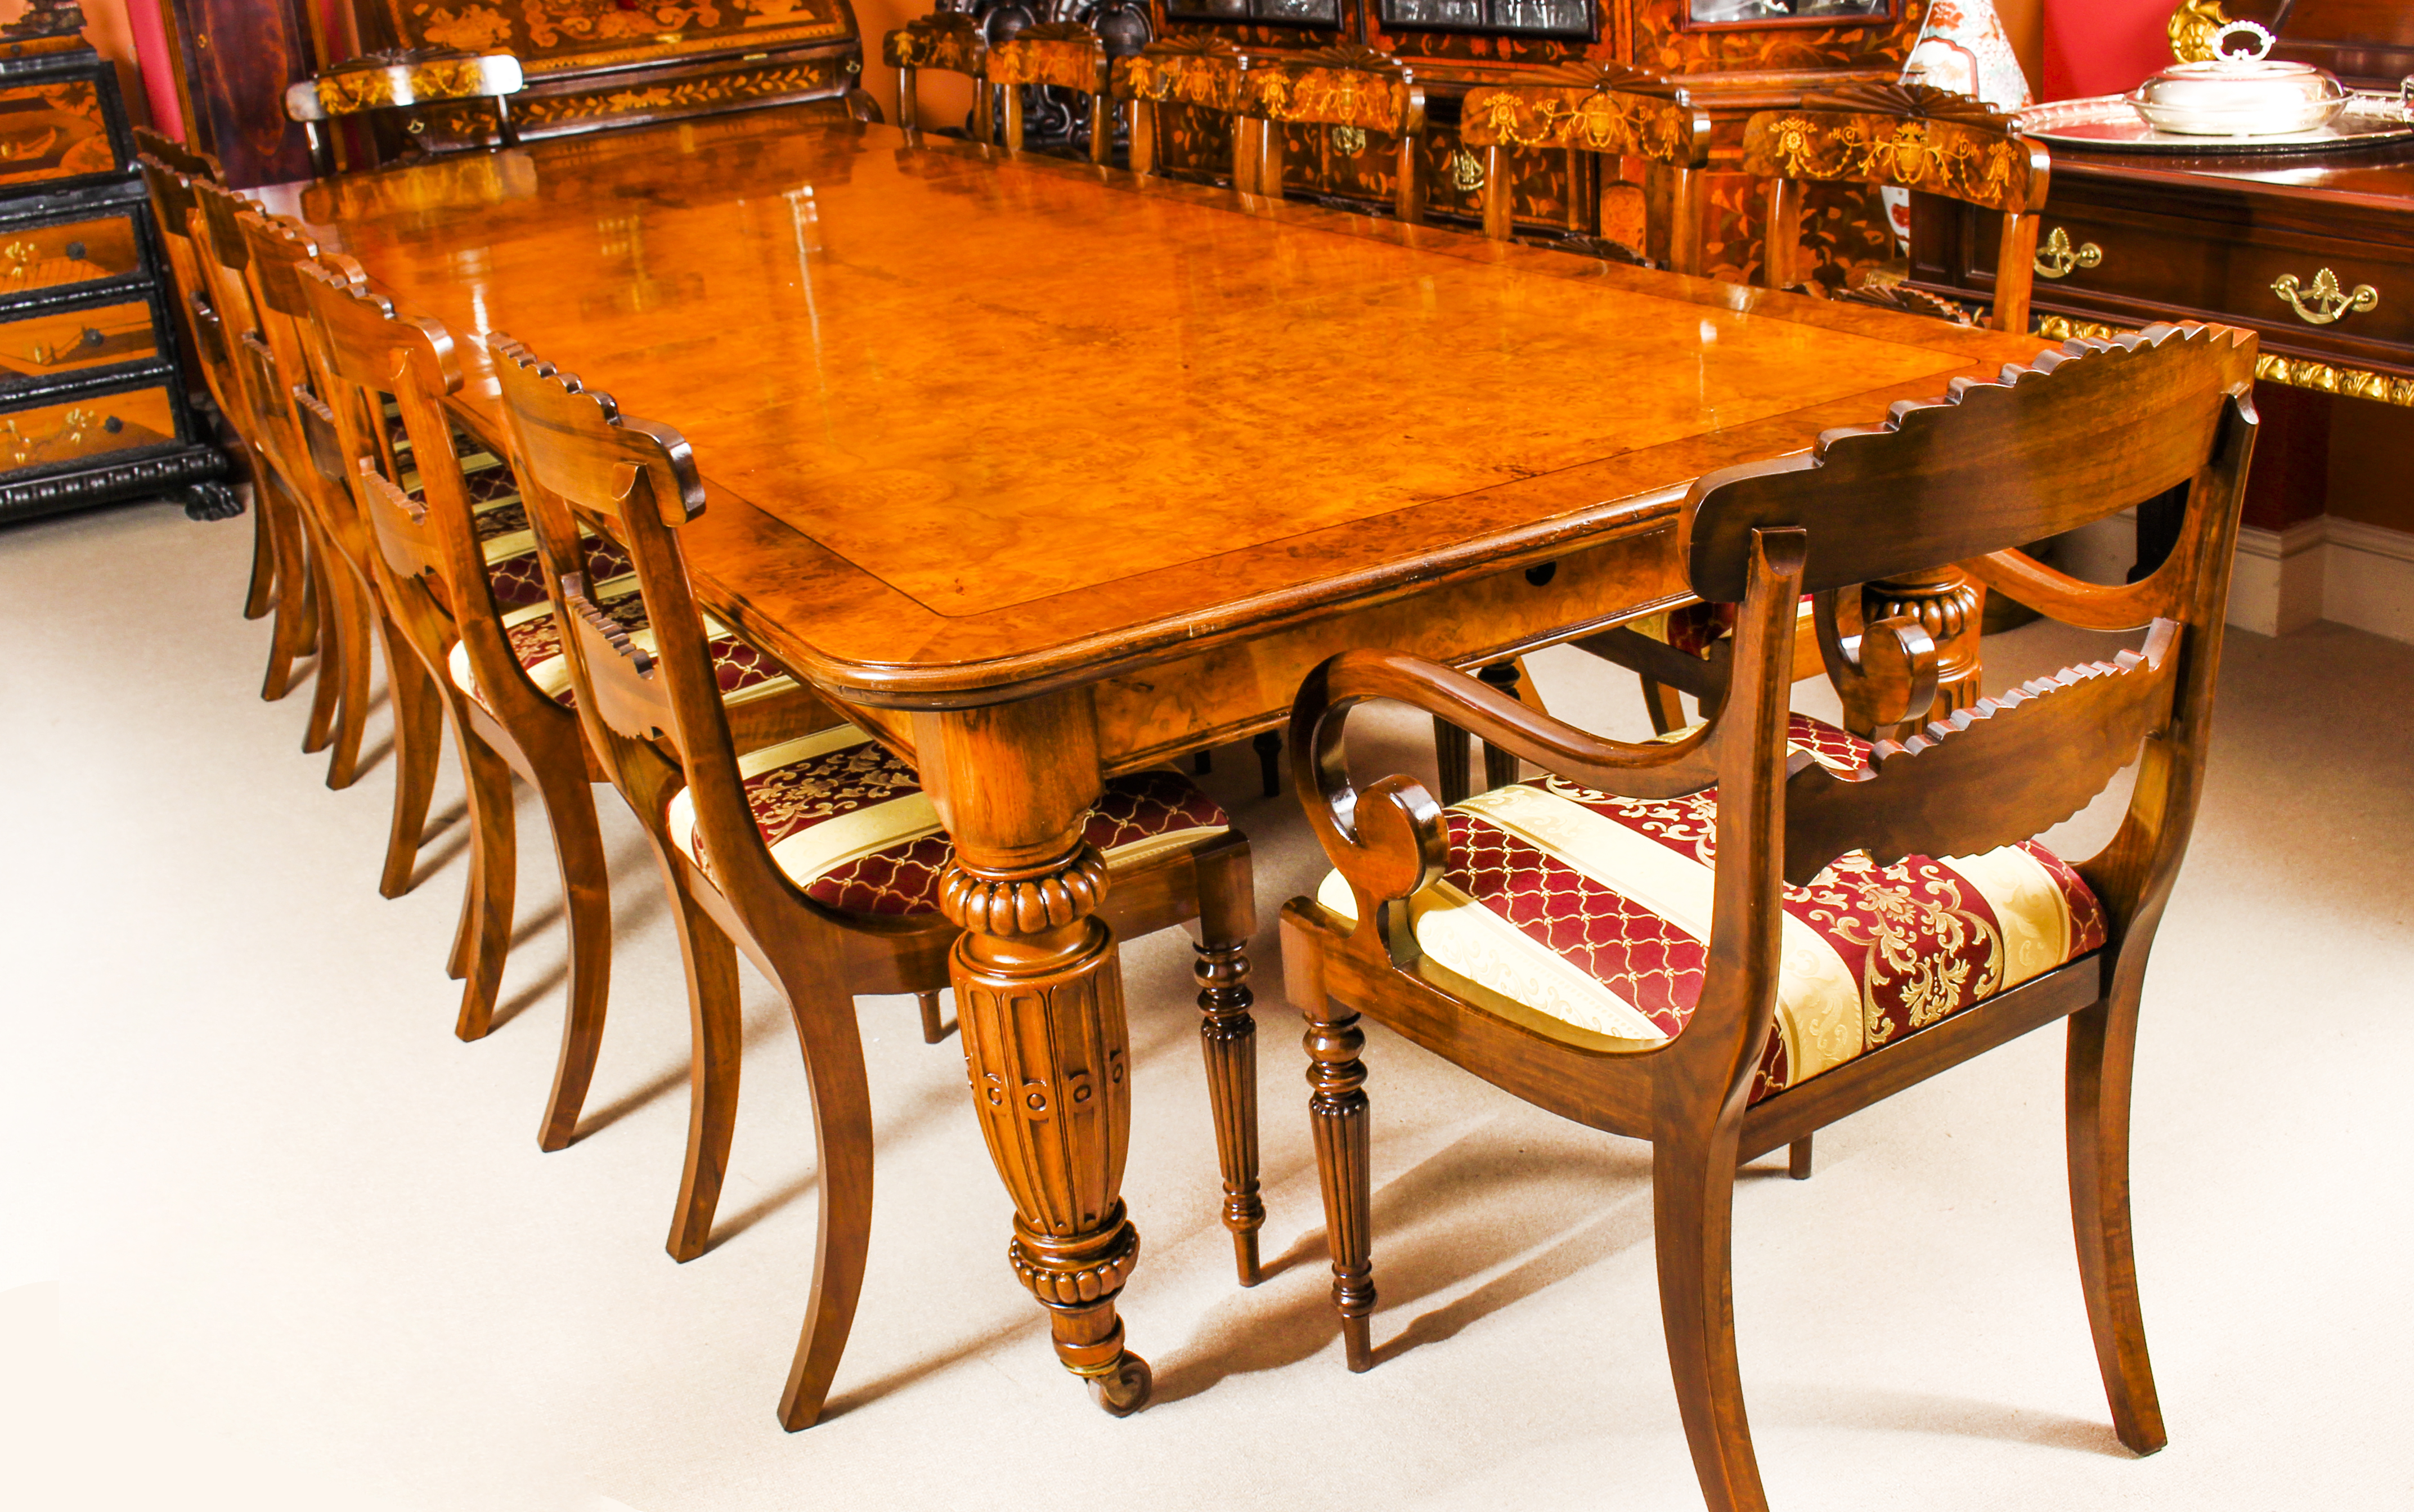 Second Hand Dining Room Tables For Sale